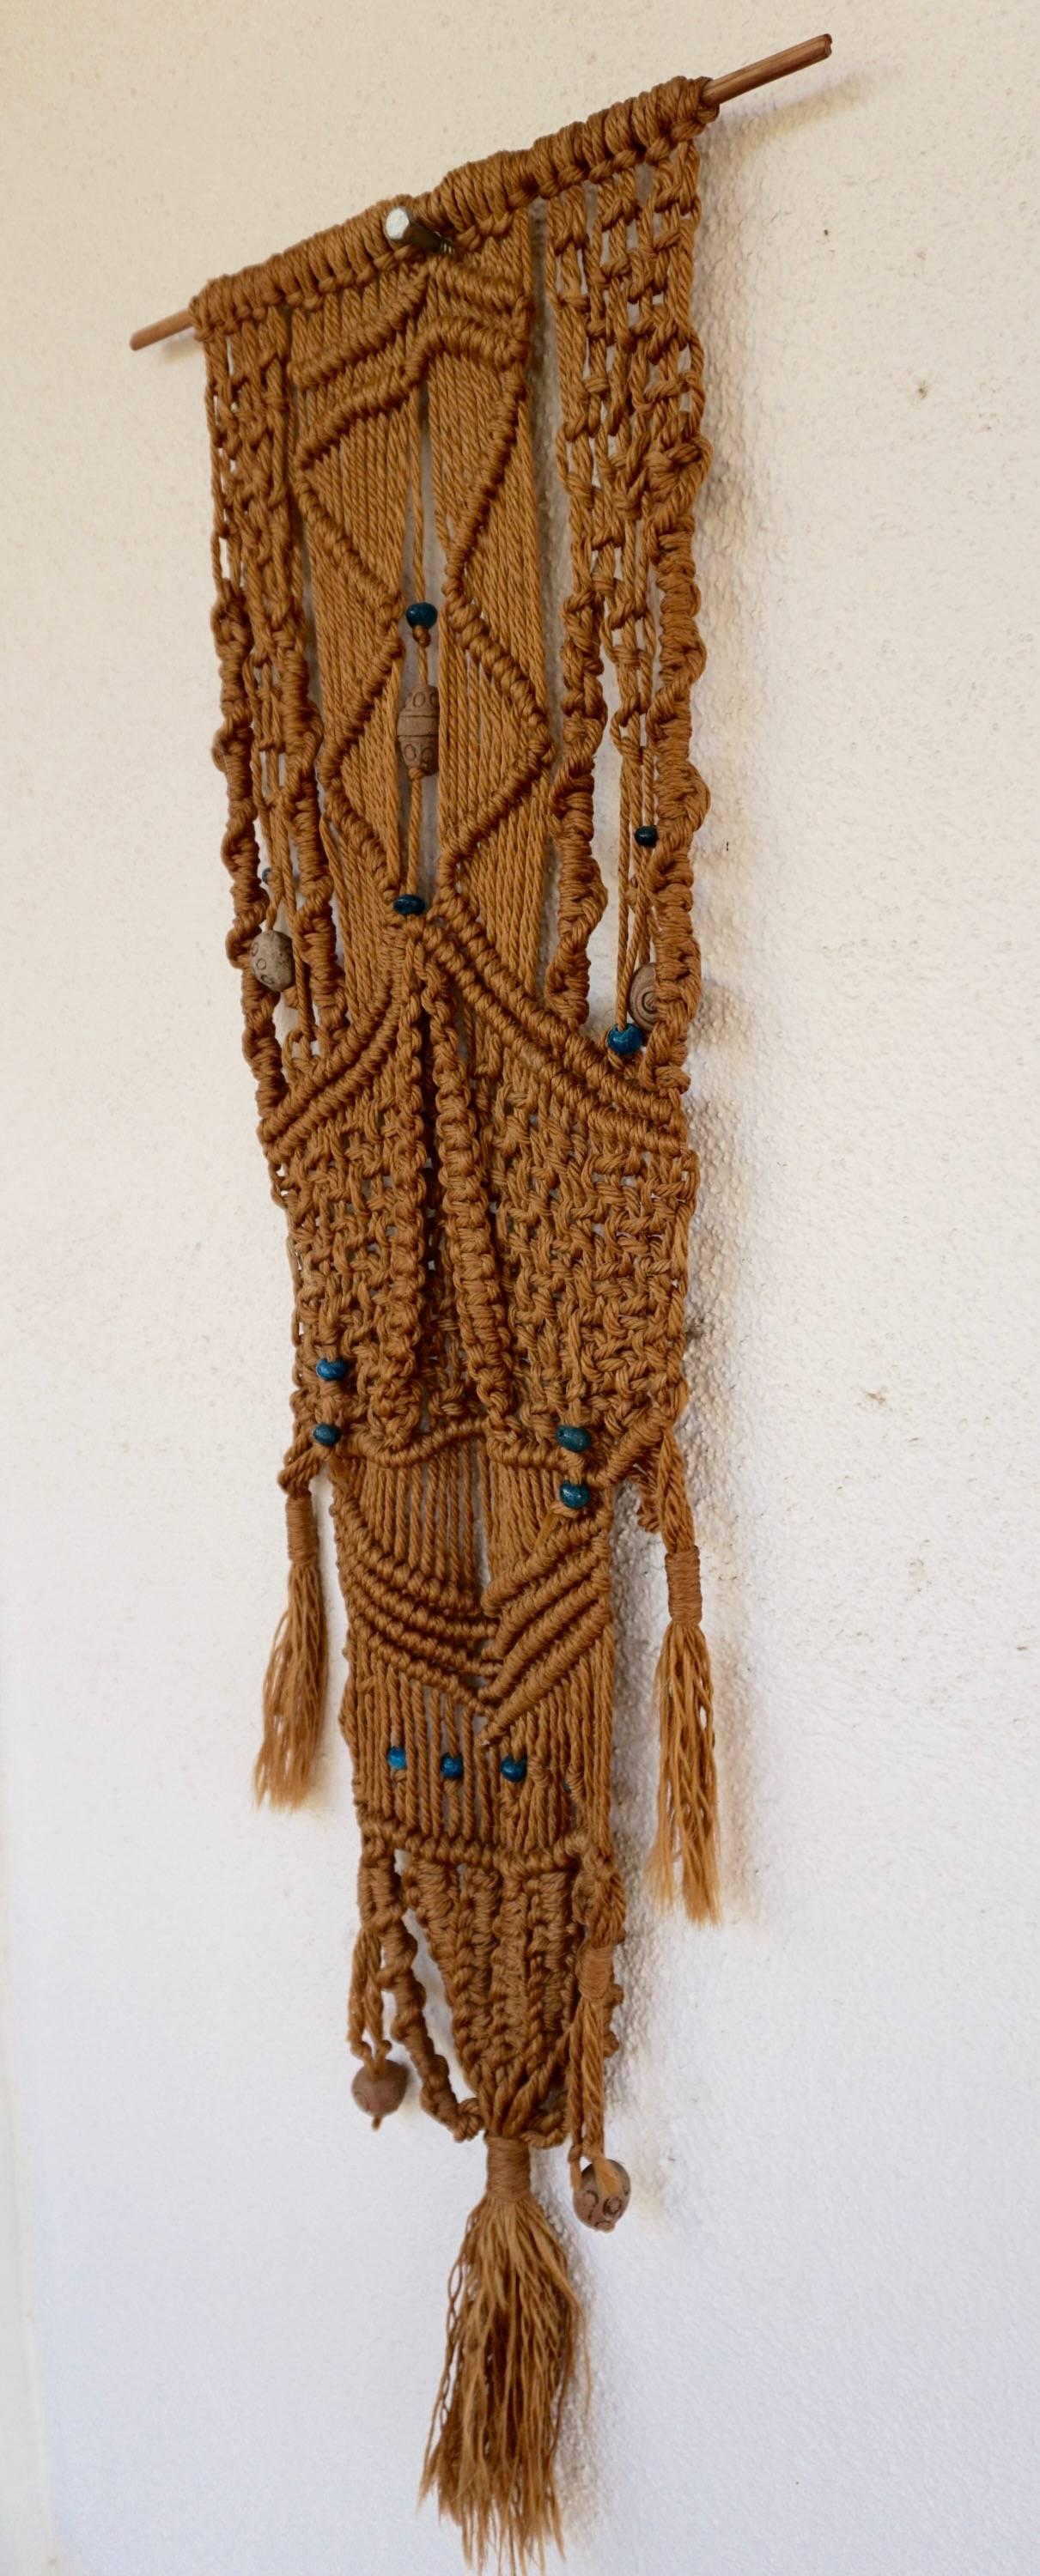 Excellent example of macrame made popular in the 1960s with beads incorporated into the piece.